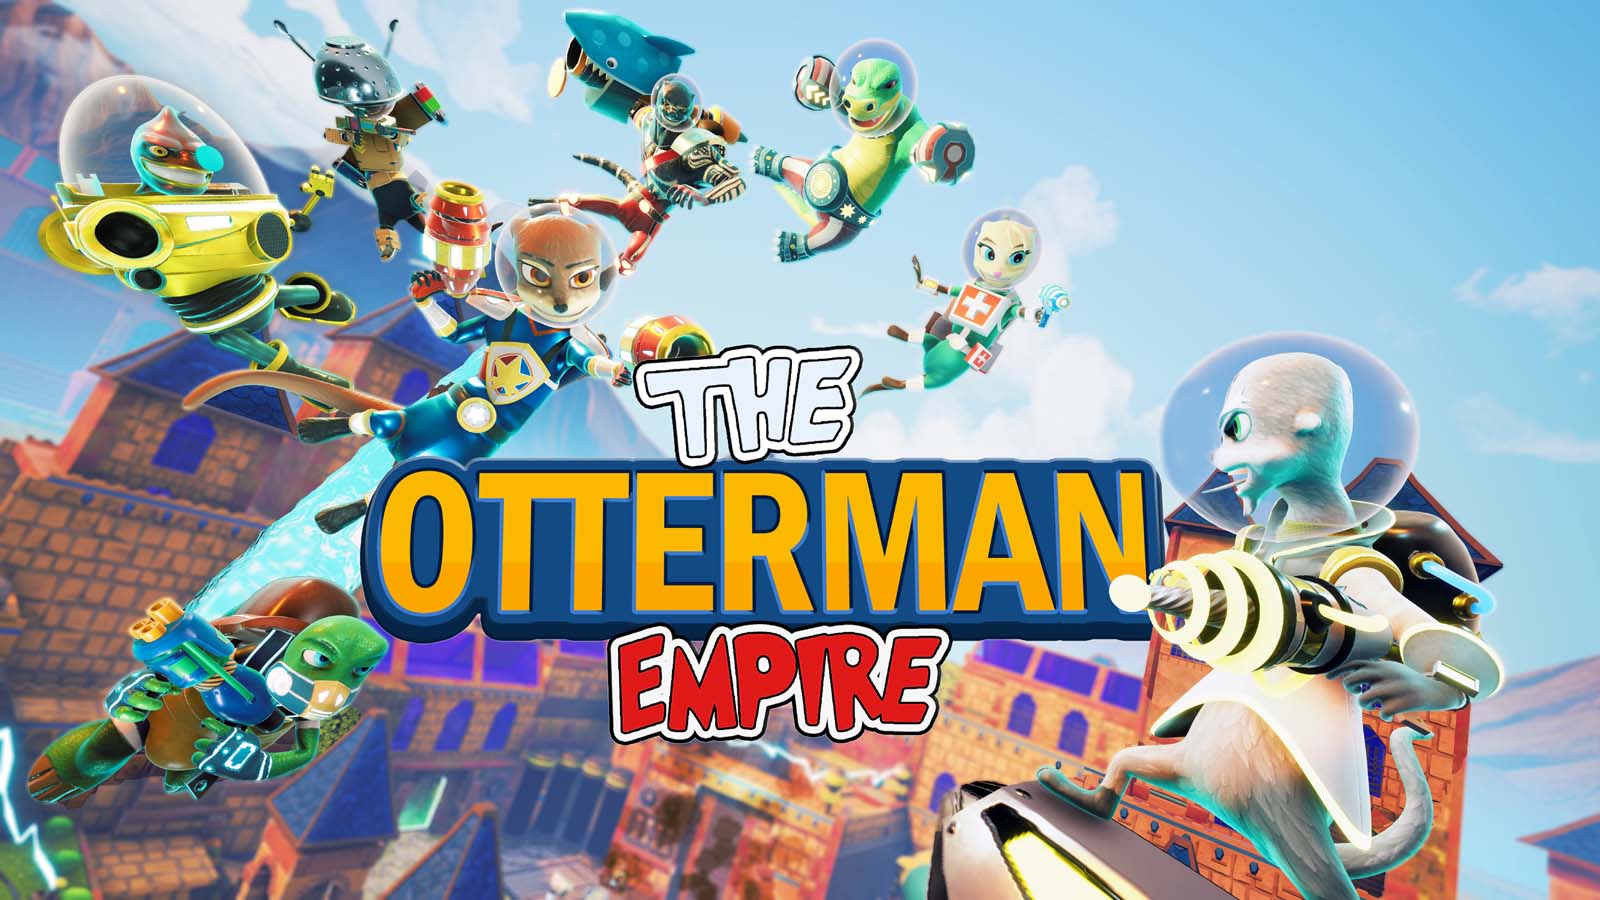 The Otterman Empire Has launched title